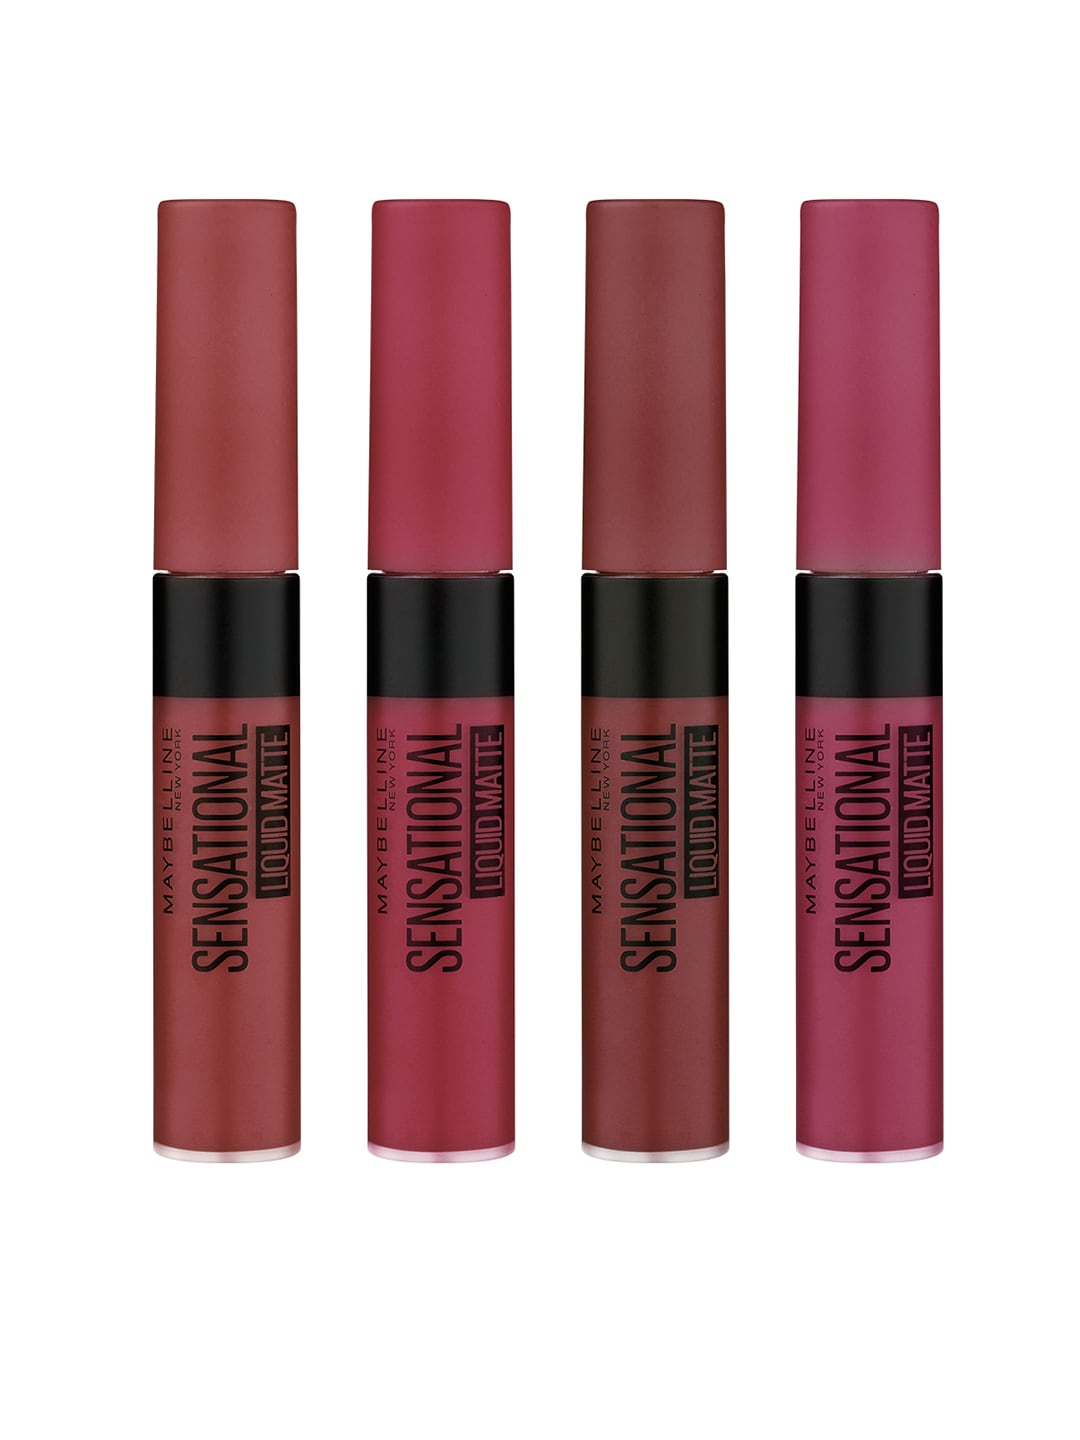 Maybelline New York Pout & Play - Set of 4 Sensational Liquid Matte Lipsticks - 7ml each Price in India